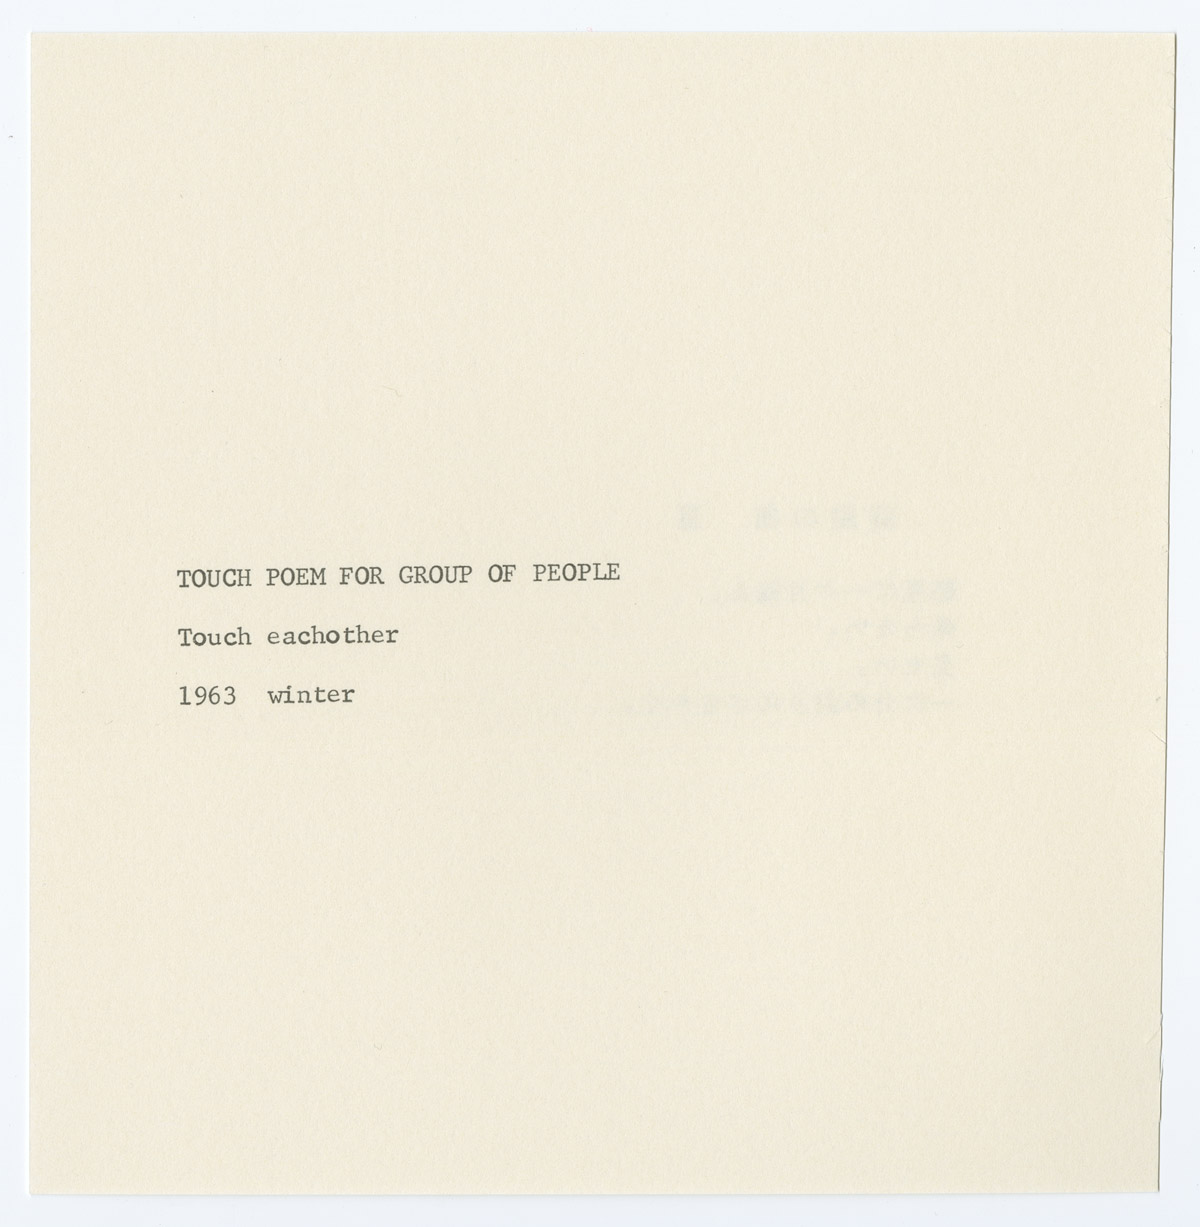 Fig. 4. Yoko Ono, Touch Poem for a Group of People, 1963, winter, 1964. From Grapefruit, 1964. © Yoko Ono 